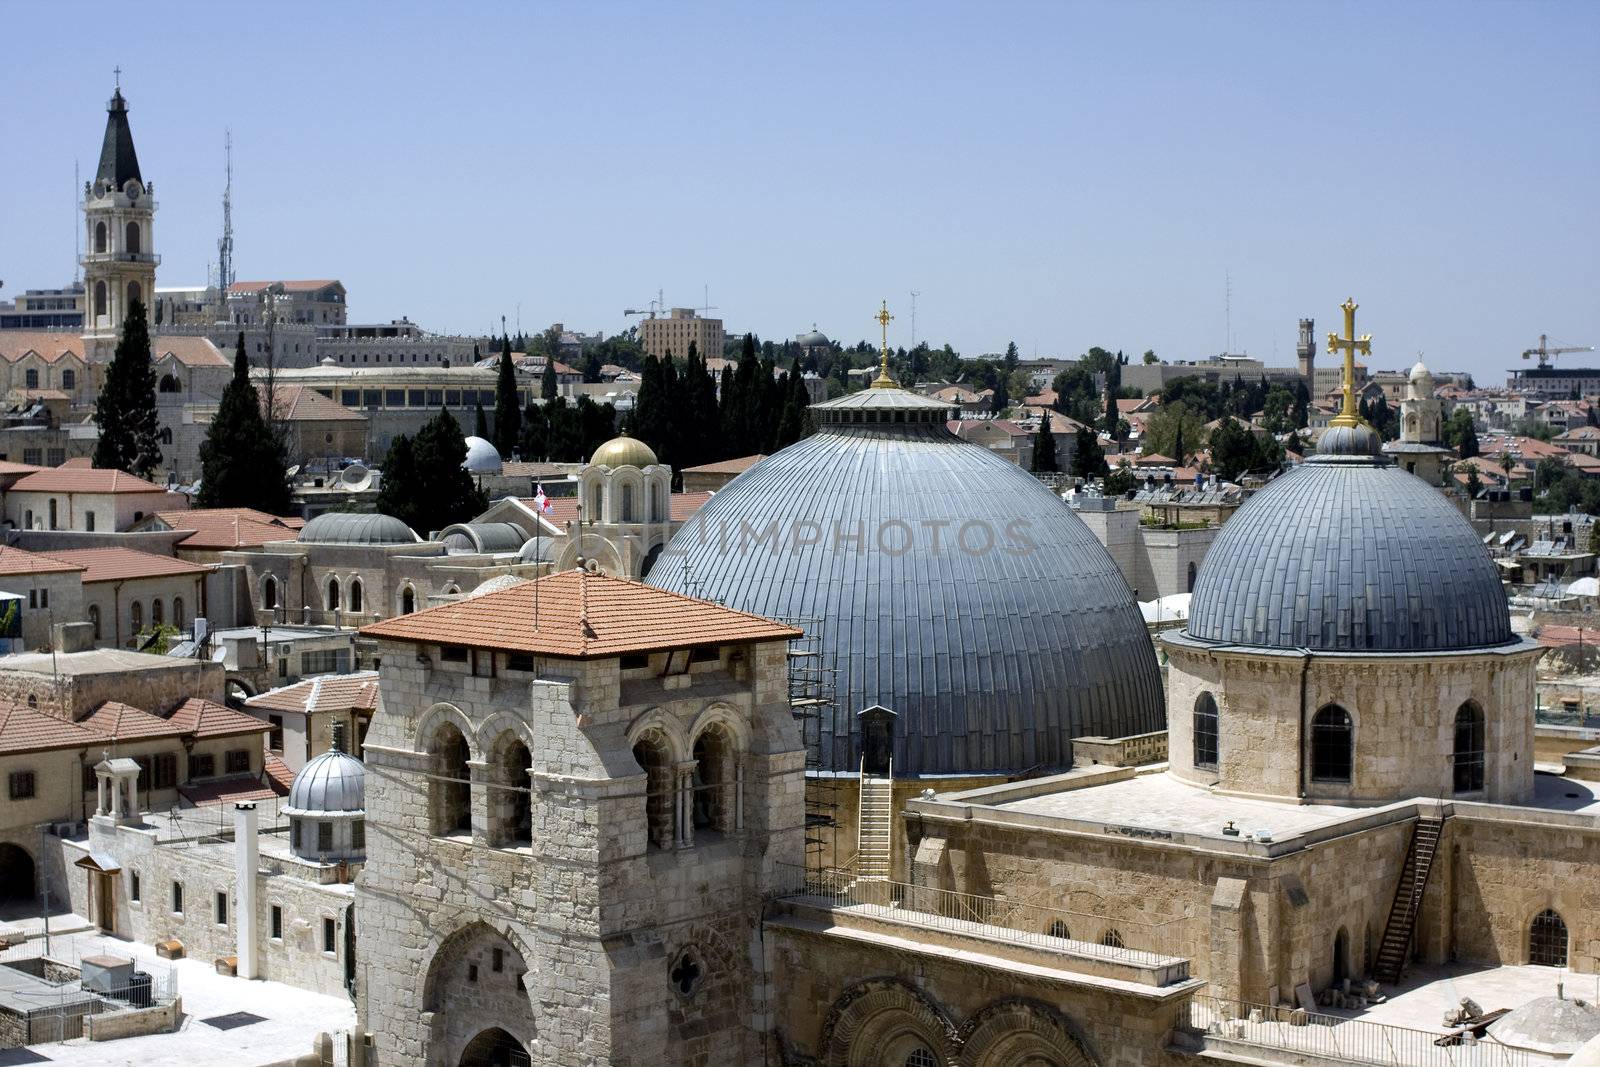 View from one of the roofs in the old city of Jerusalem